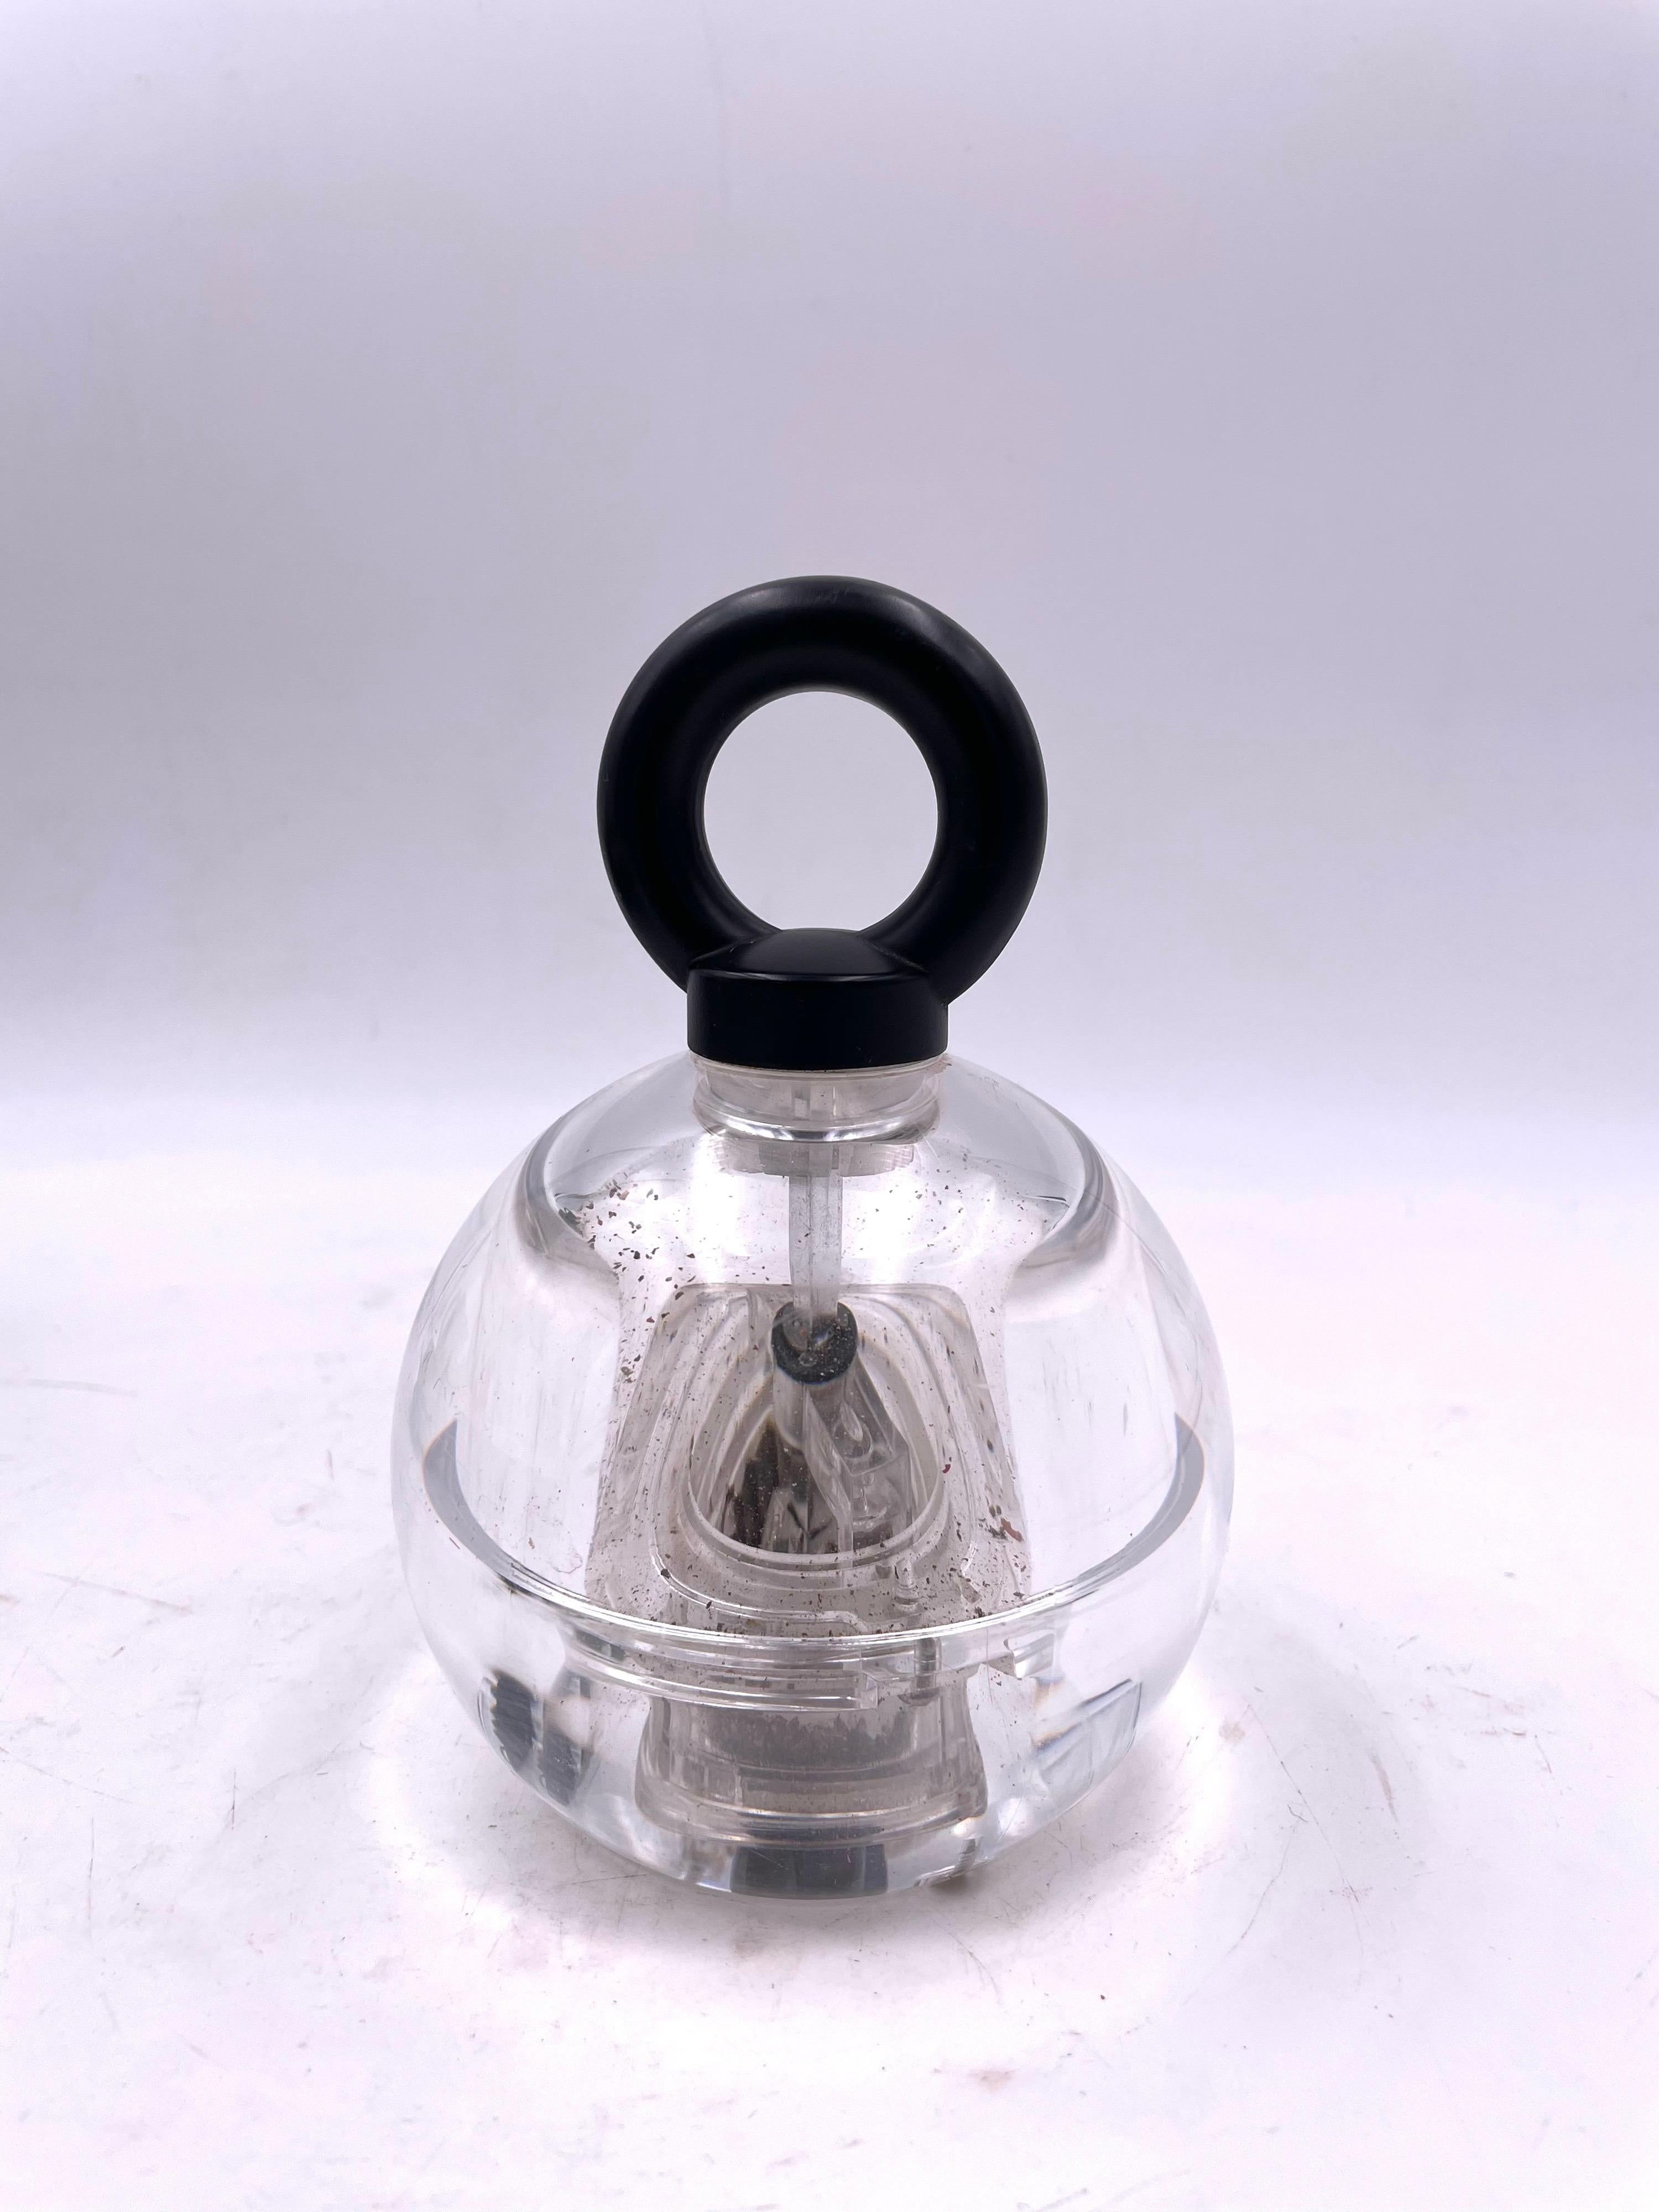 A rare 1980's lucite ball pepper grinder with a metal mechanism designed by Richard Nissen for Bodum.